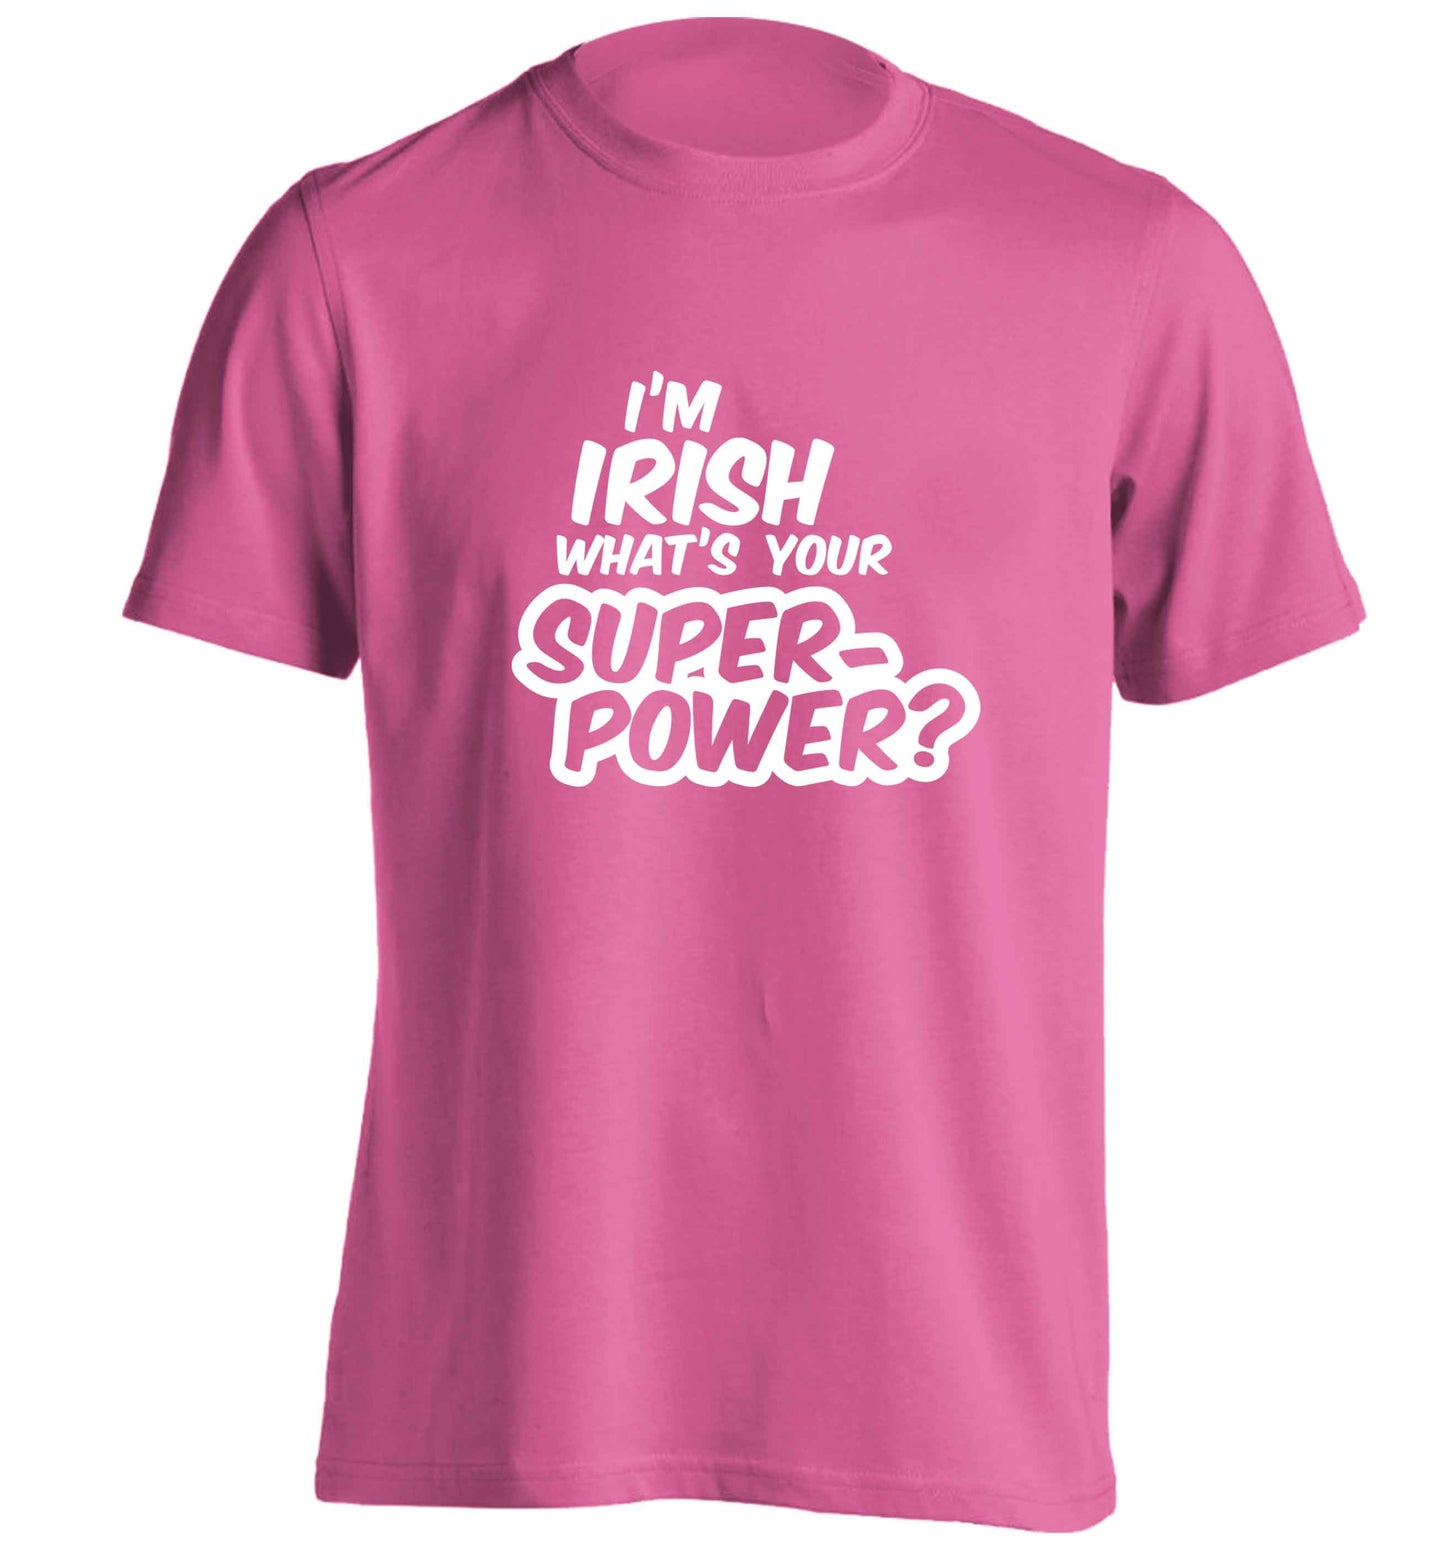 I'm Irish what's your superpower? adults unisex pink Tshirt 2XL